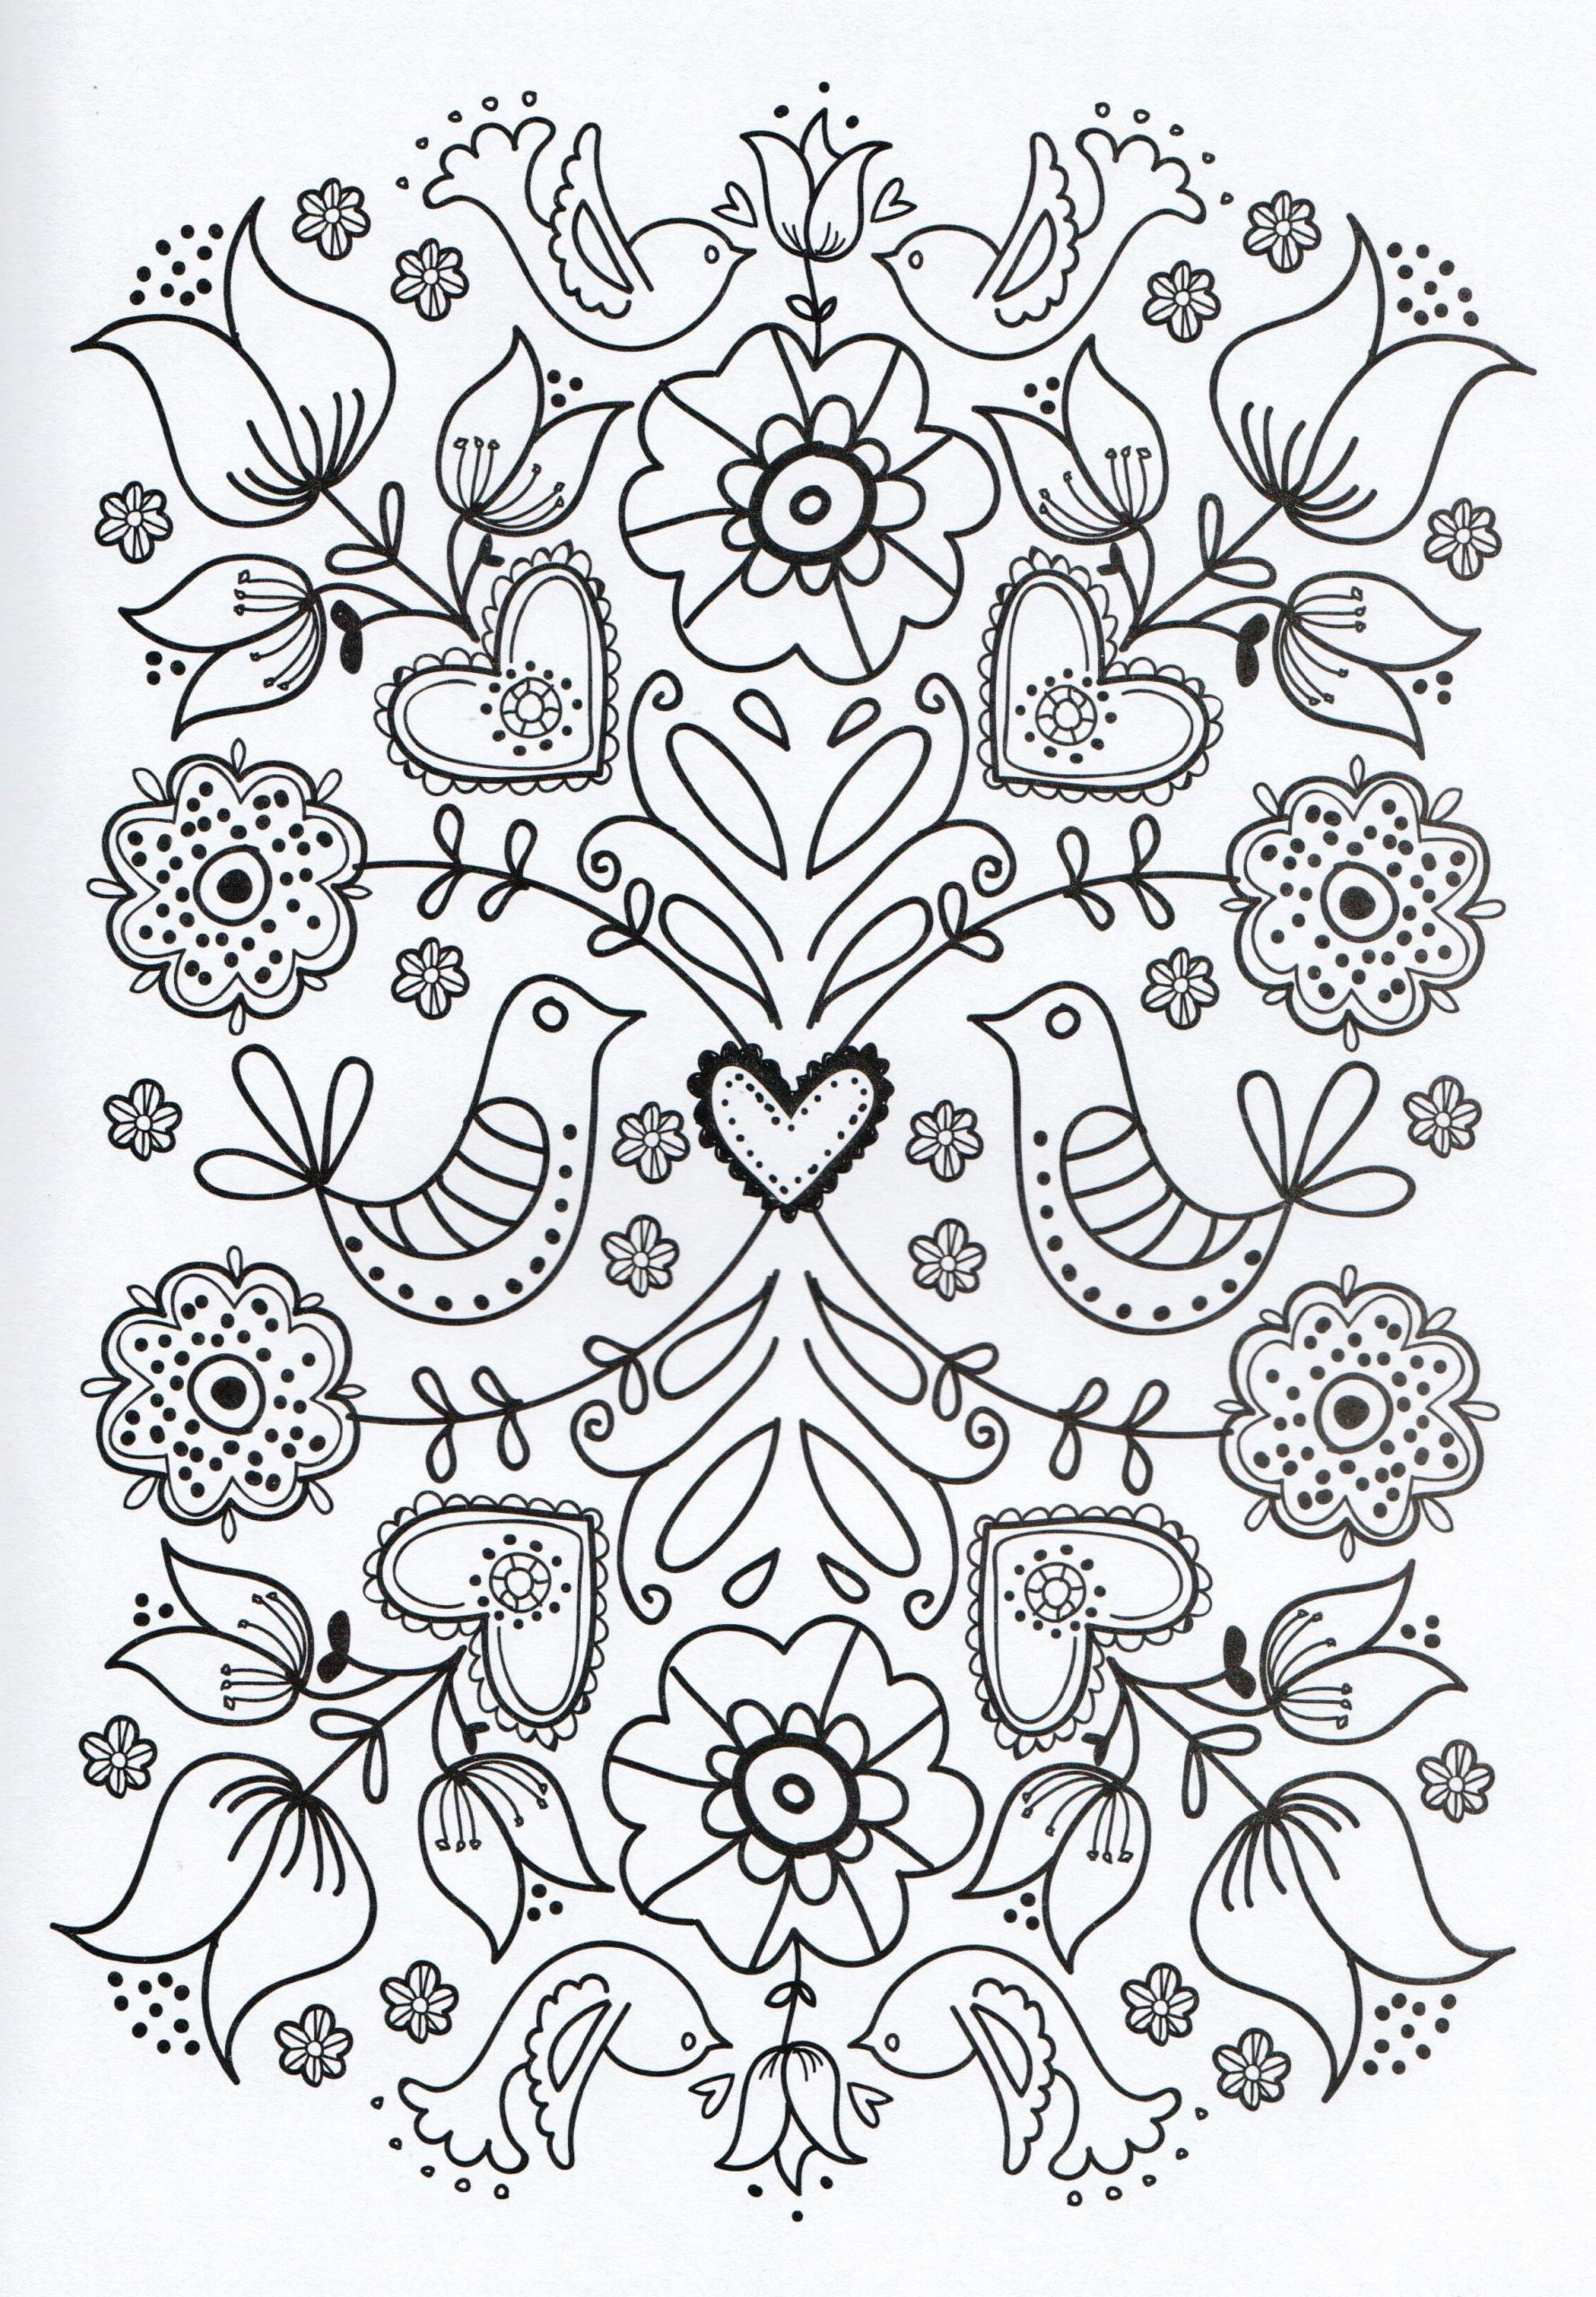 Easy Adult Coloring Pages
 10 Simple & Useful Mother’s Day Gifts to DIY or Buy